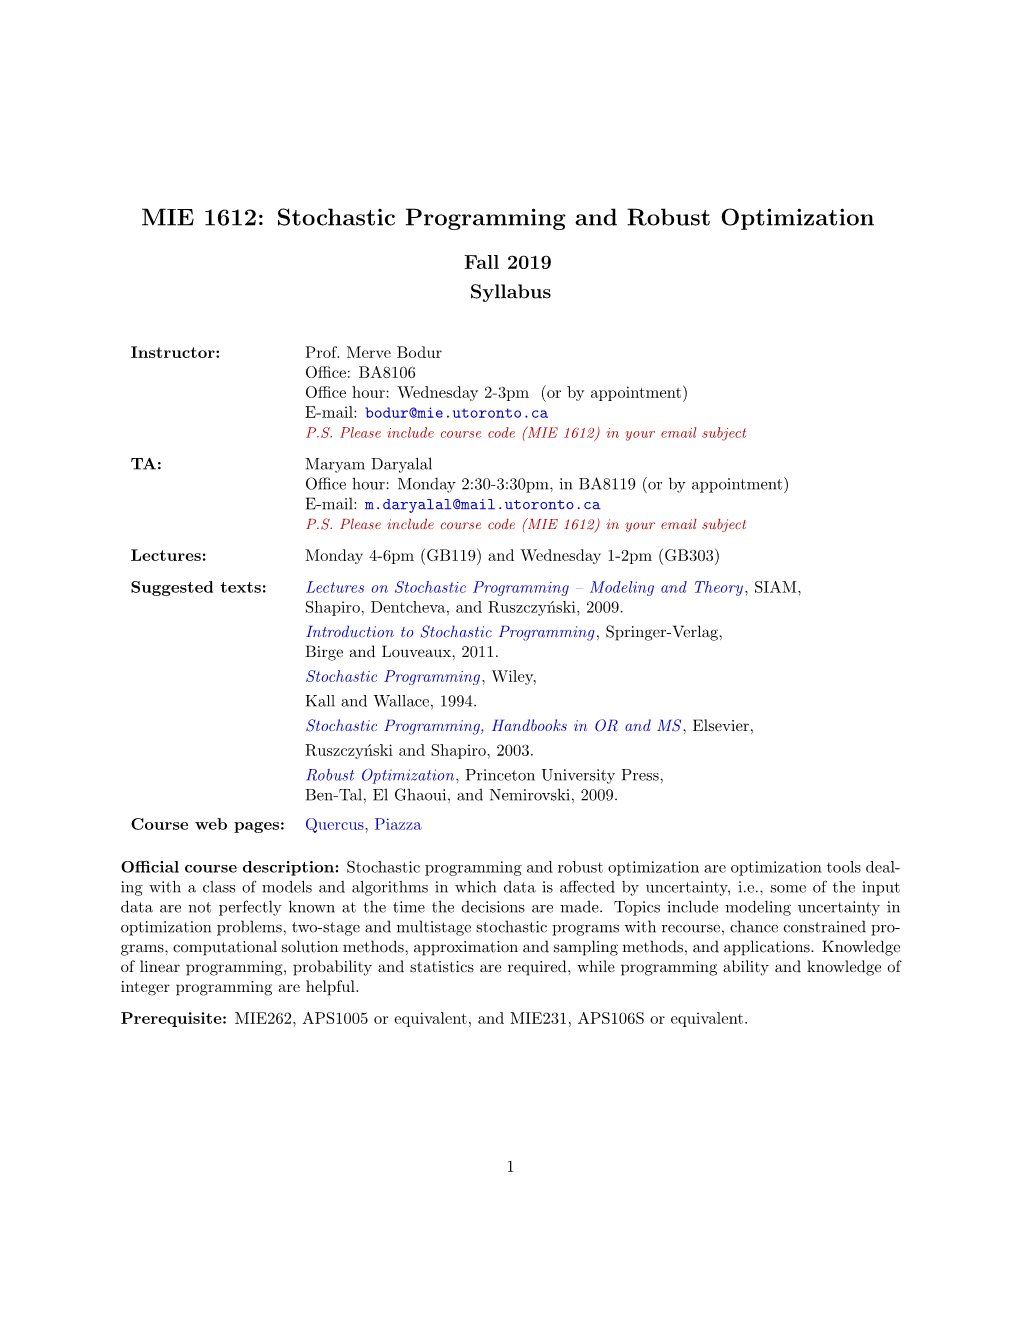 MIE 1612: Stochastic Programming and Robust Optimization